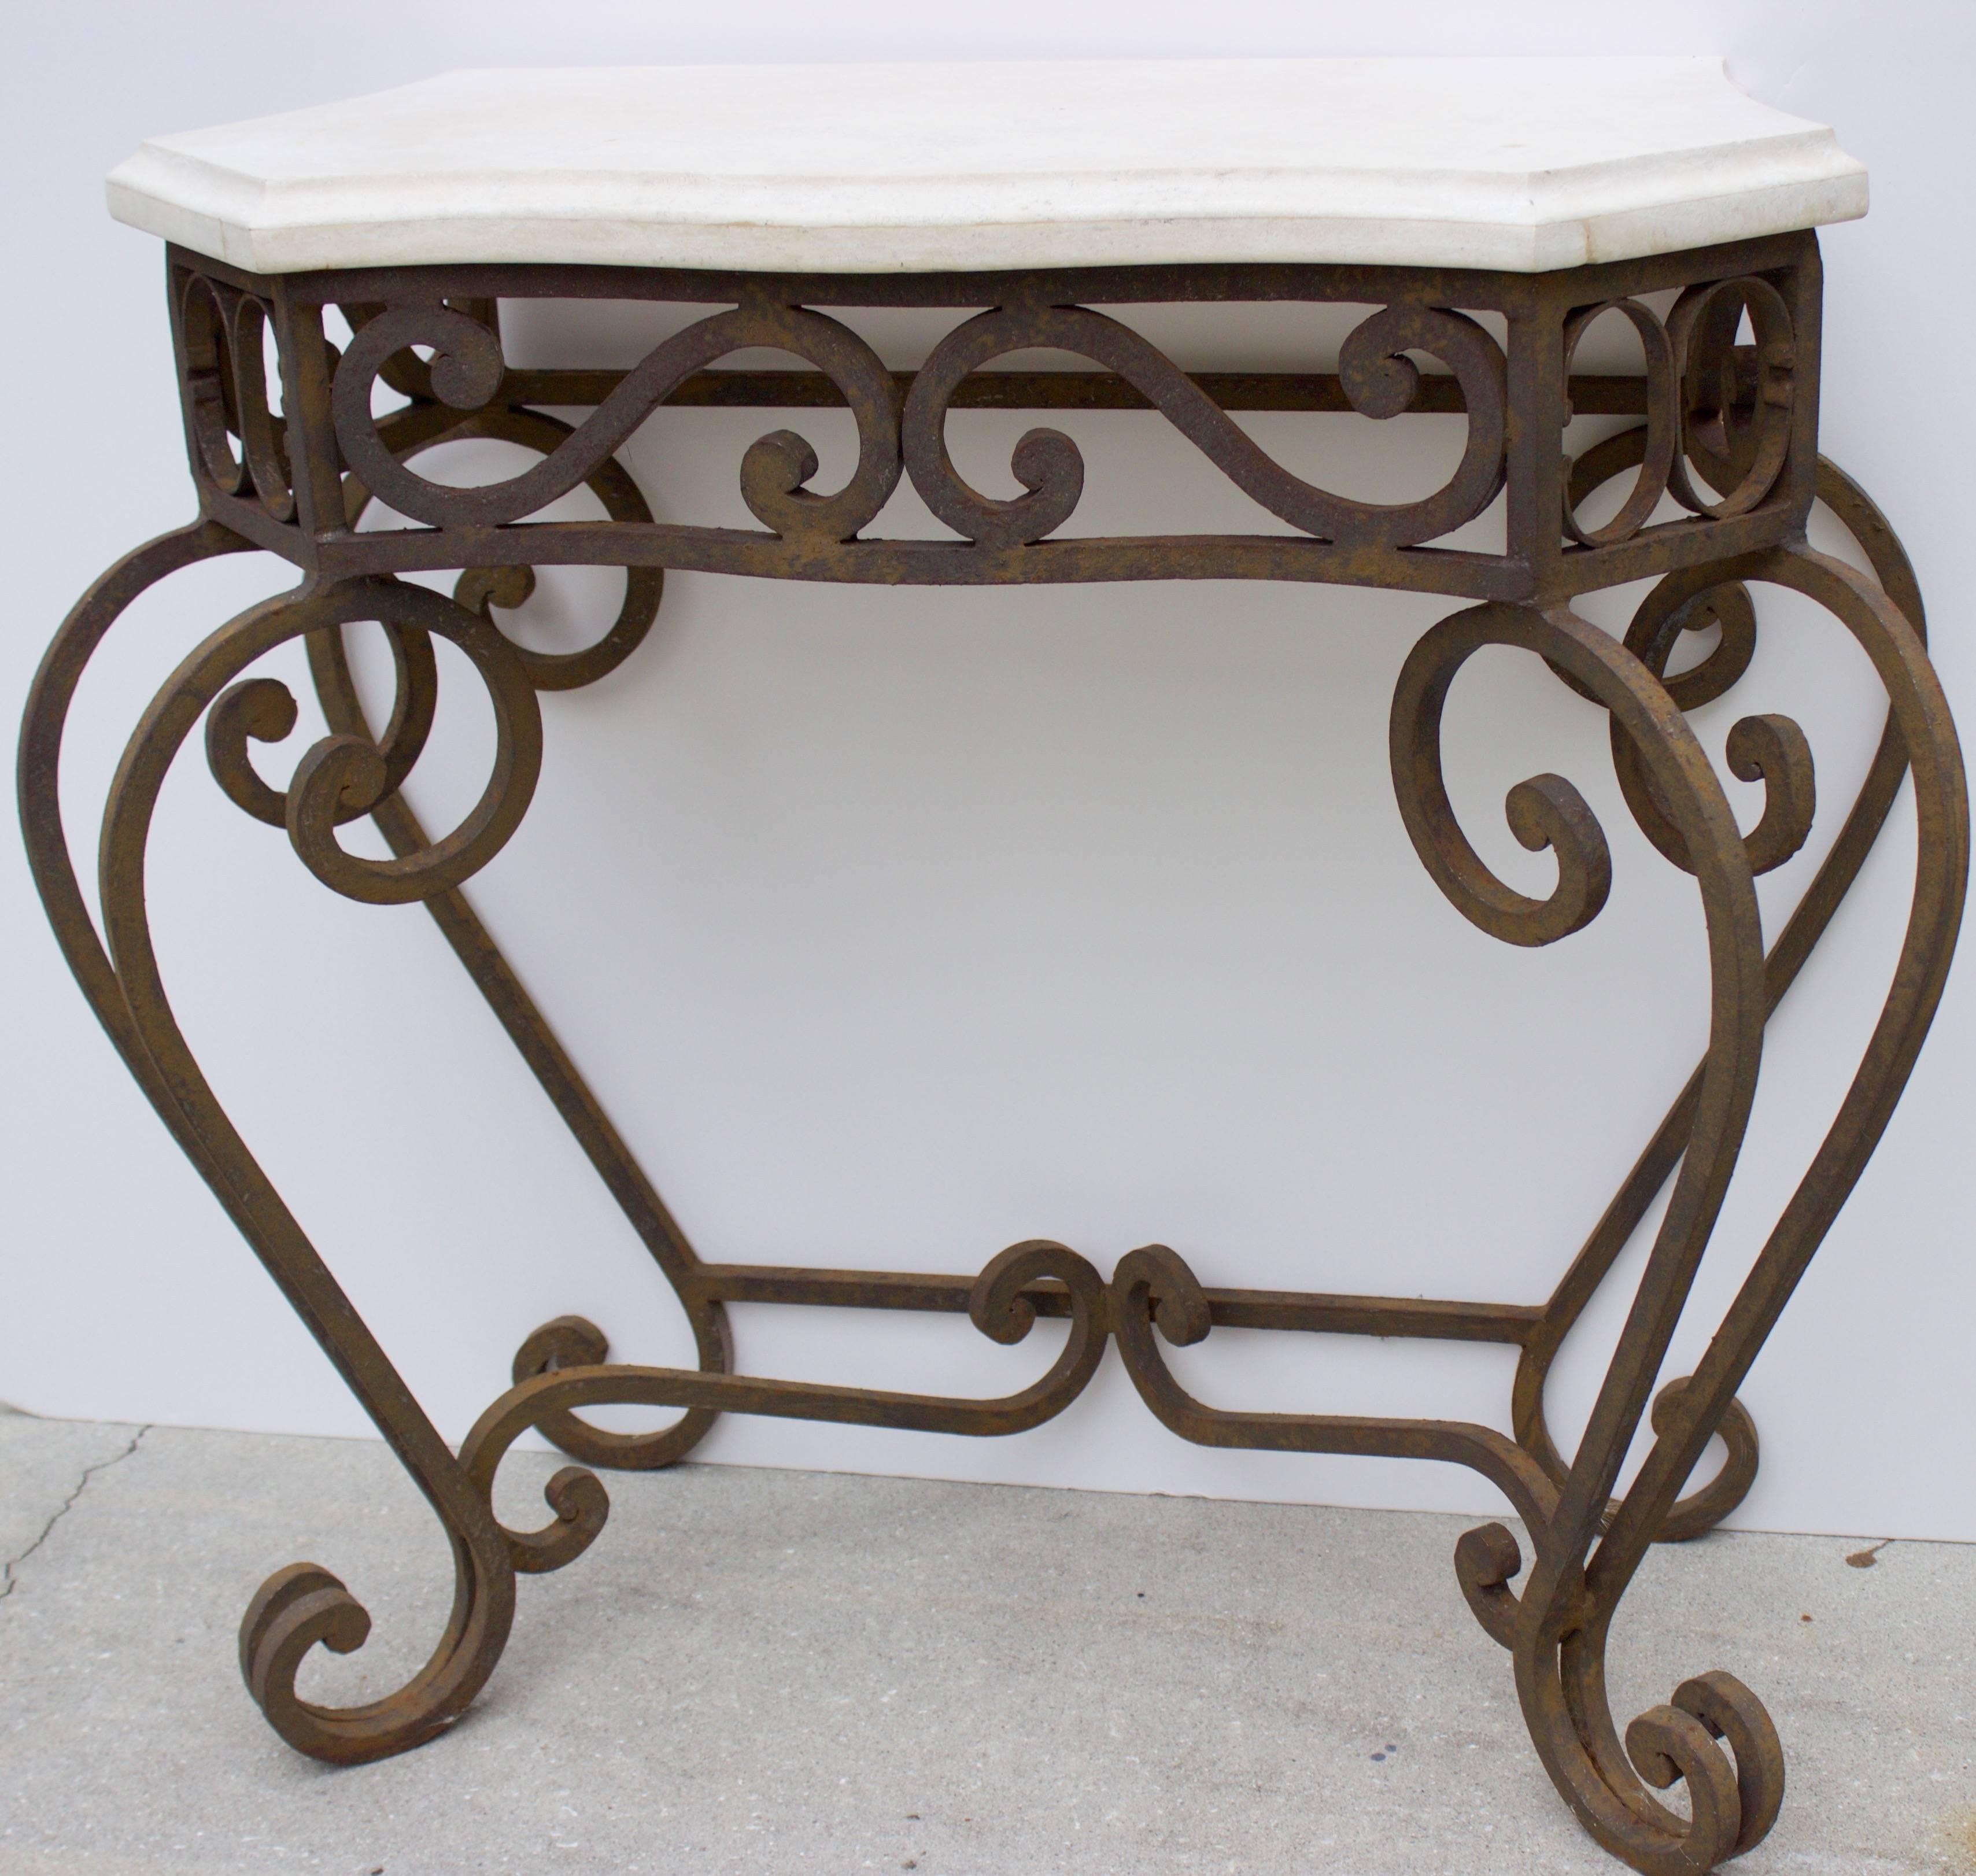 Simple but elegant serpentine wrought iron console with a serpentine beveled travertine top. 